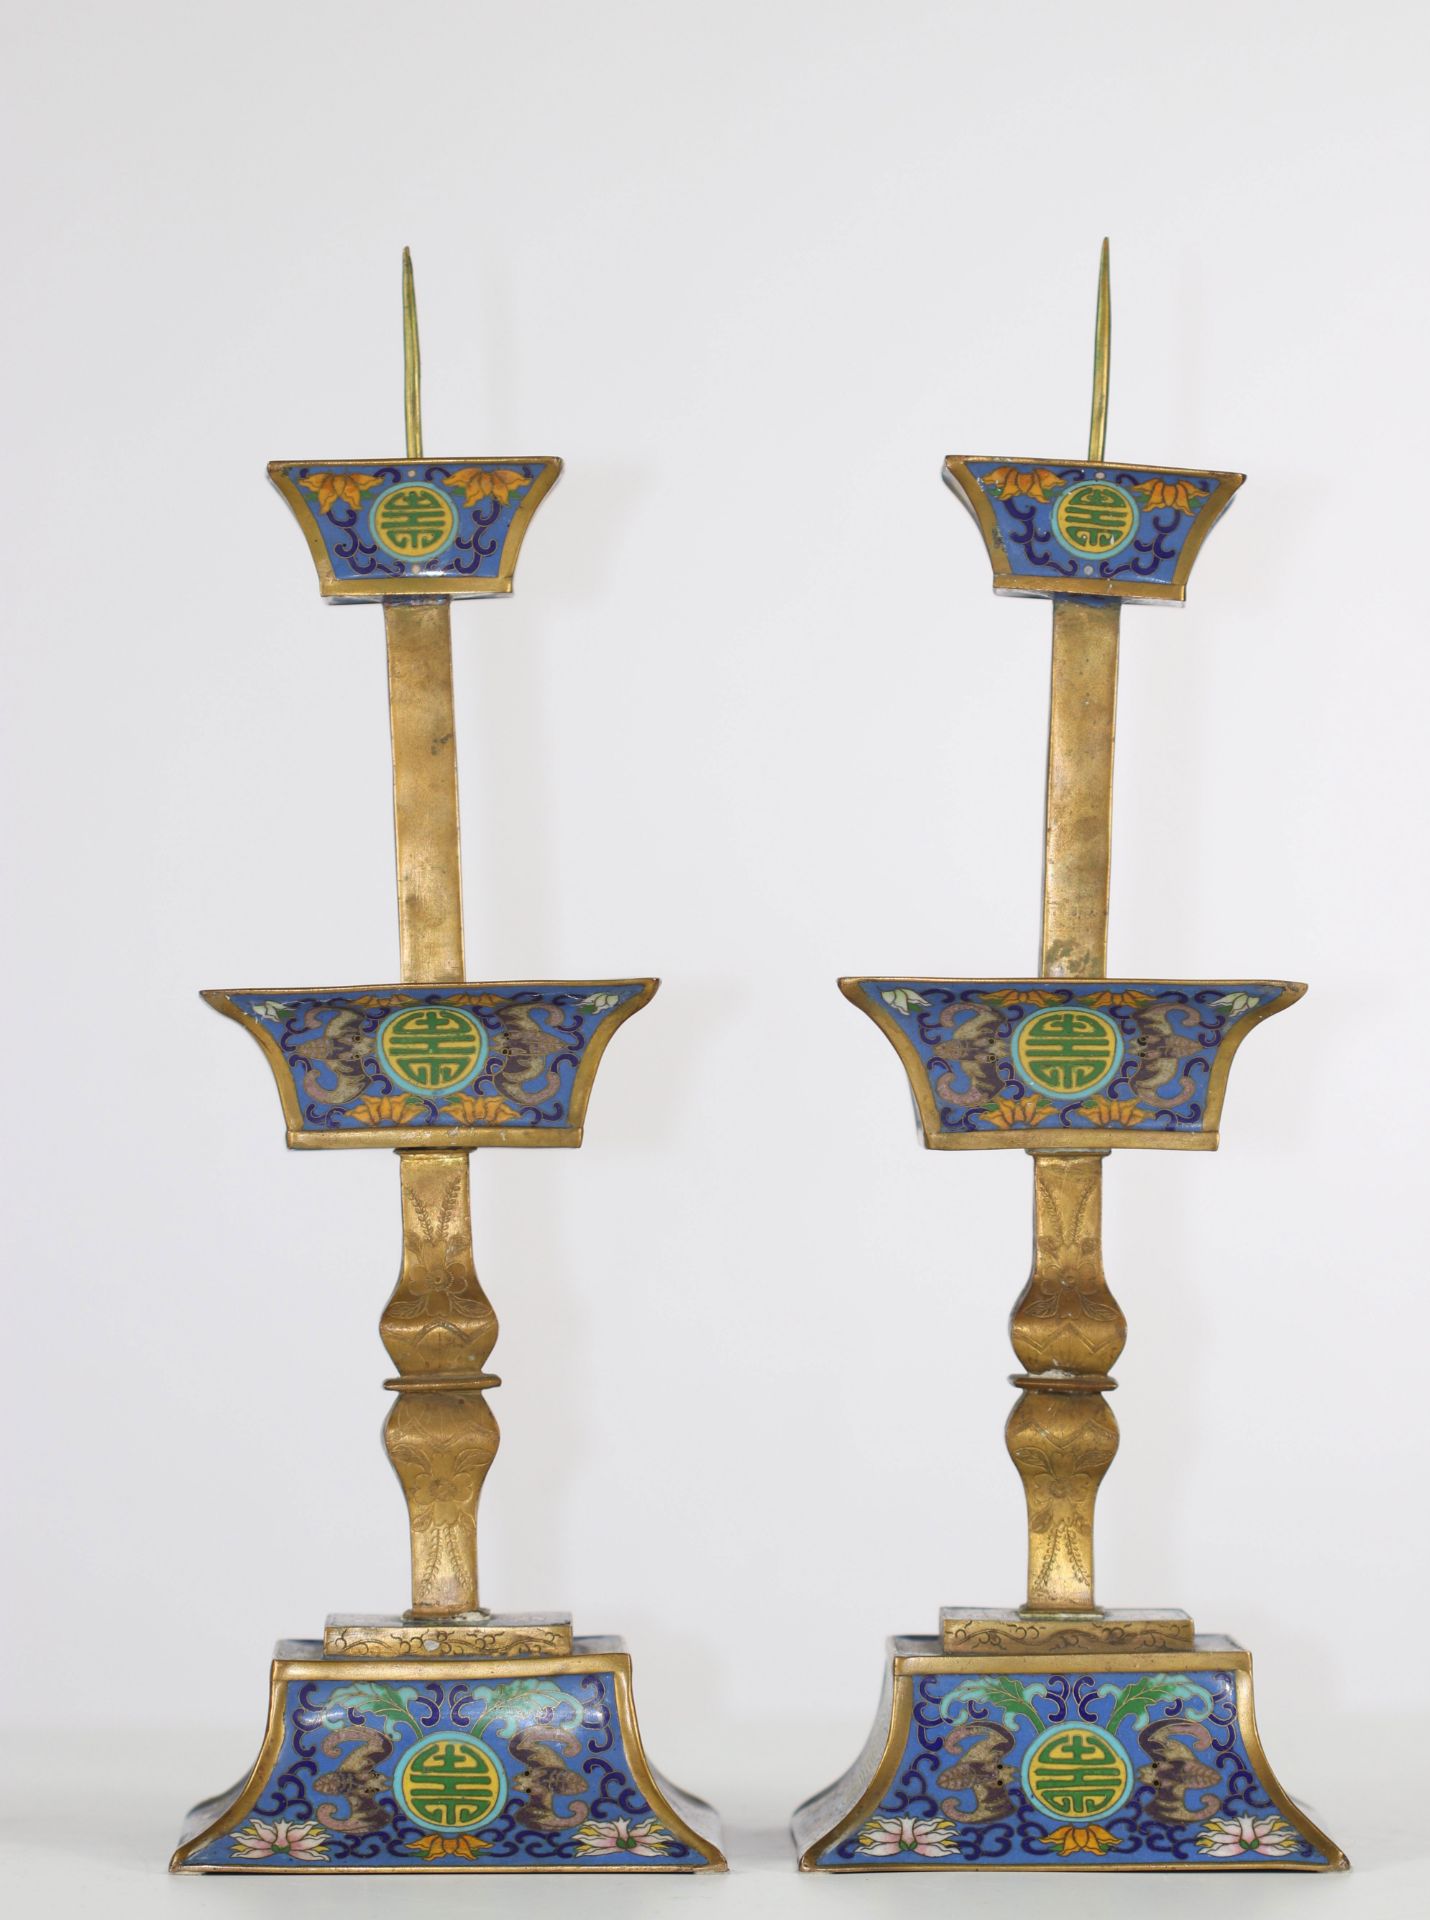 China pair of Qing period cloisonne candlesticks